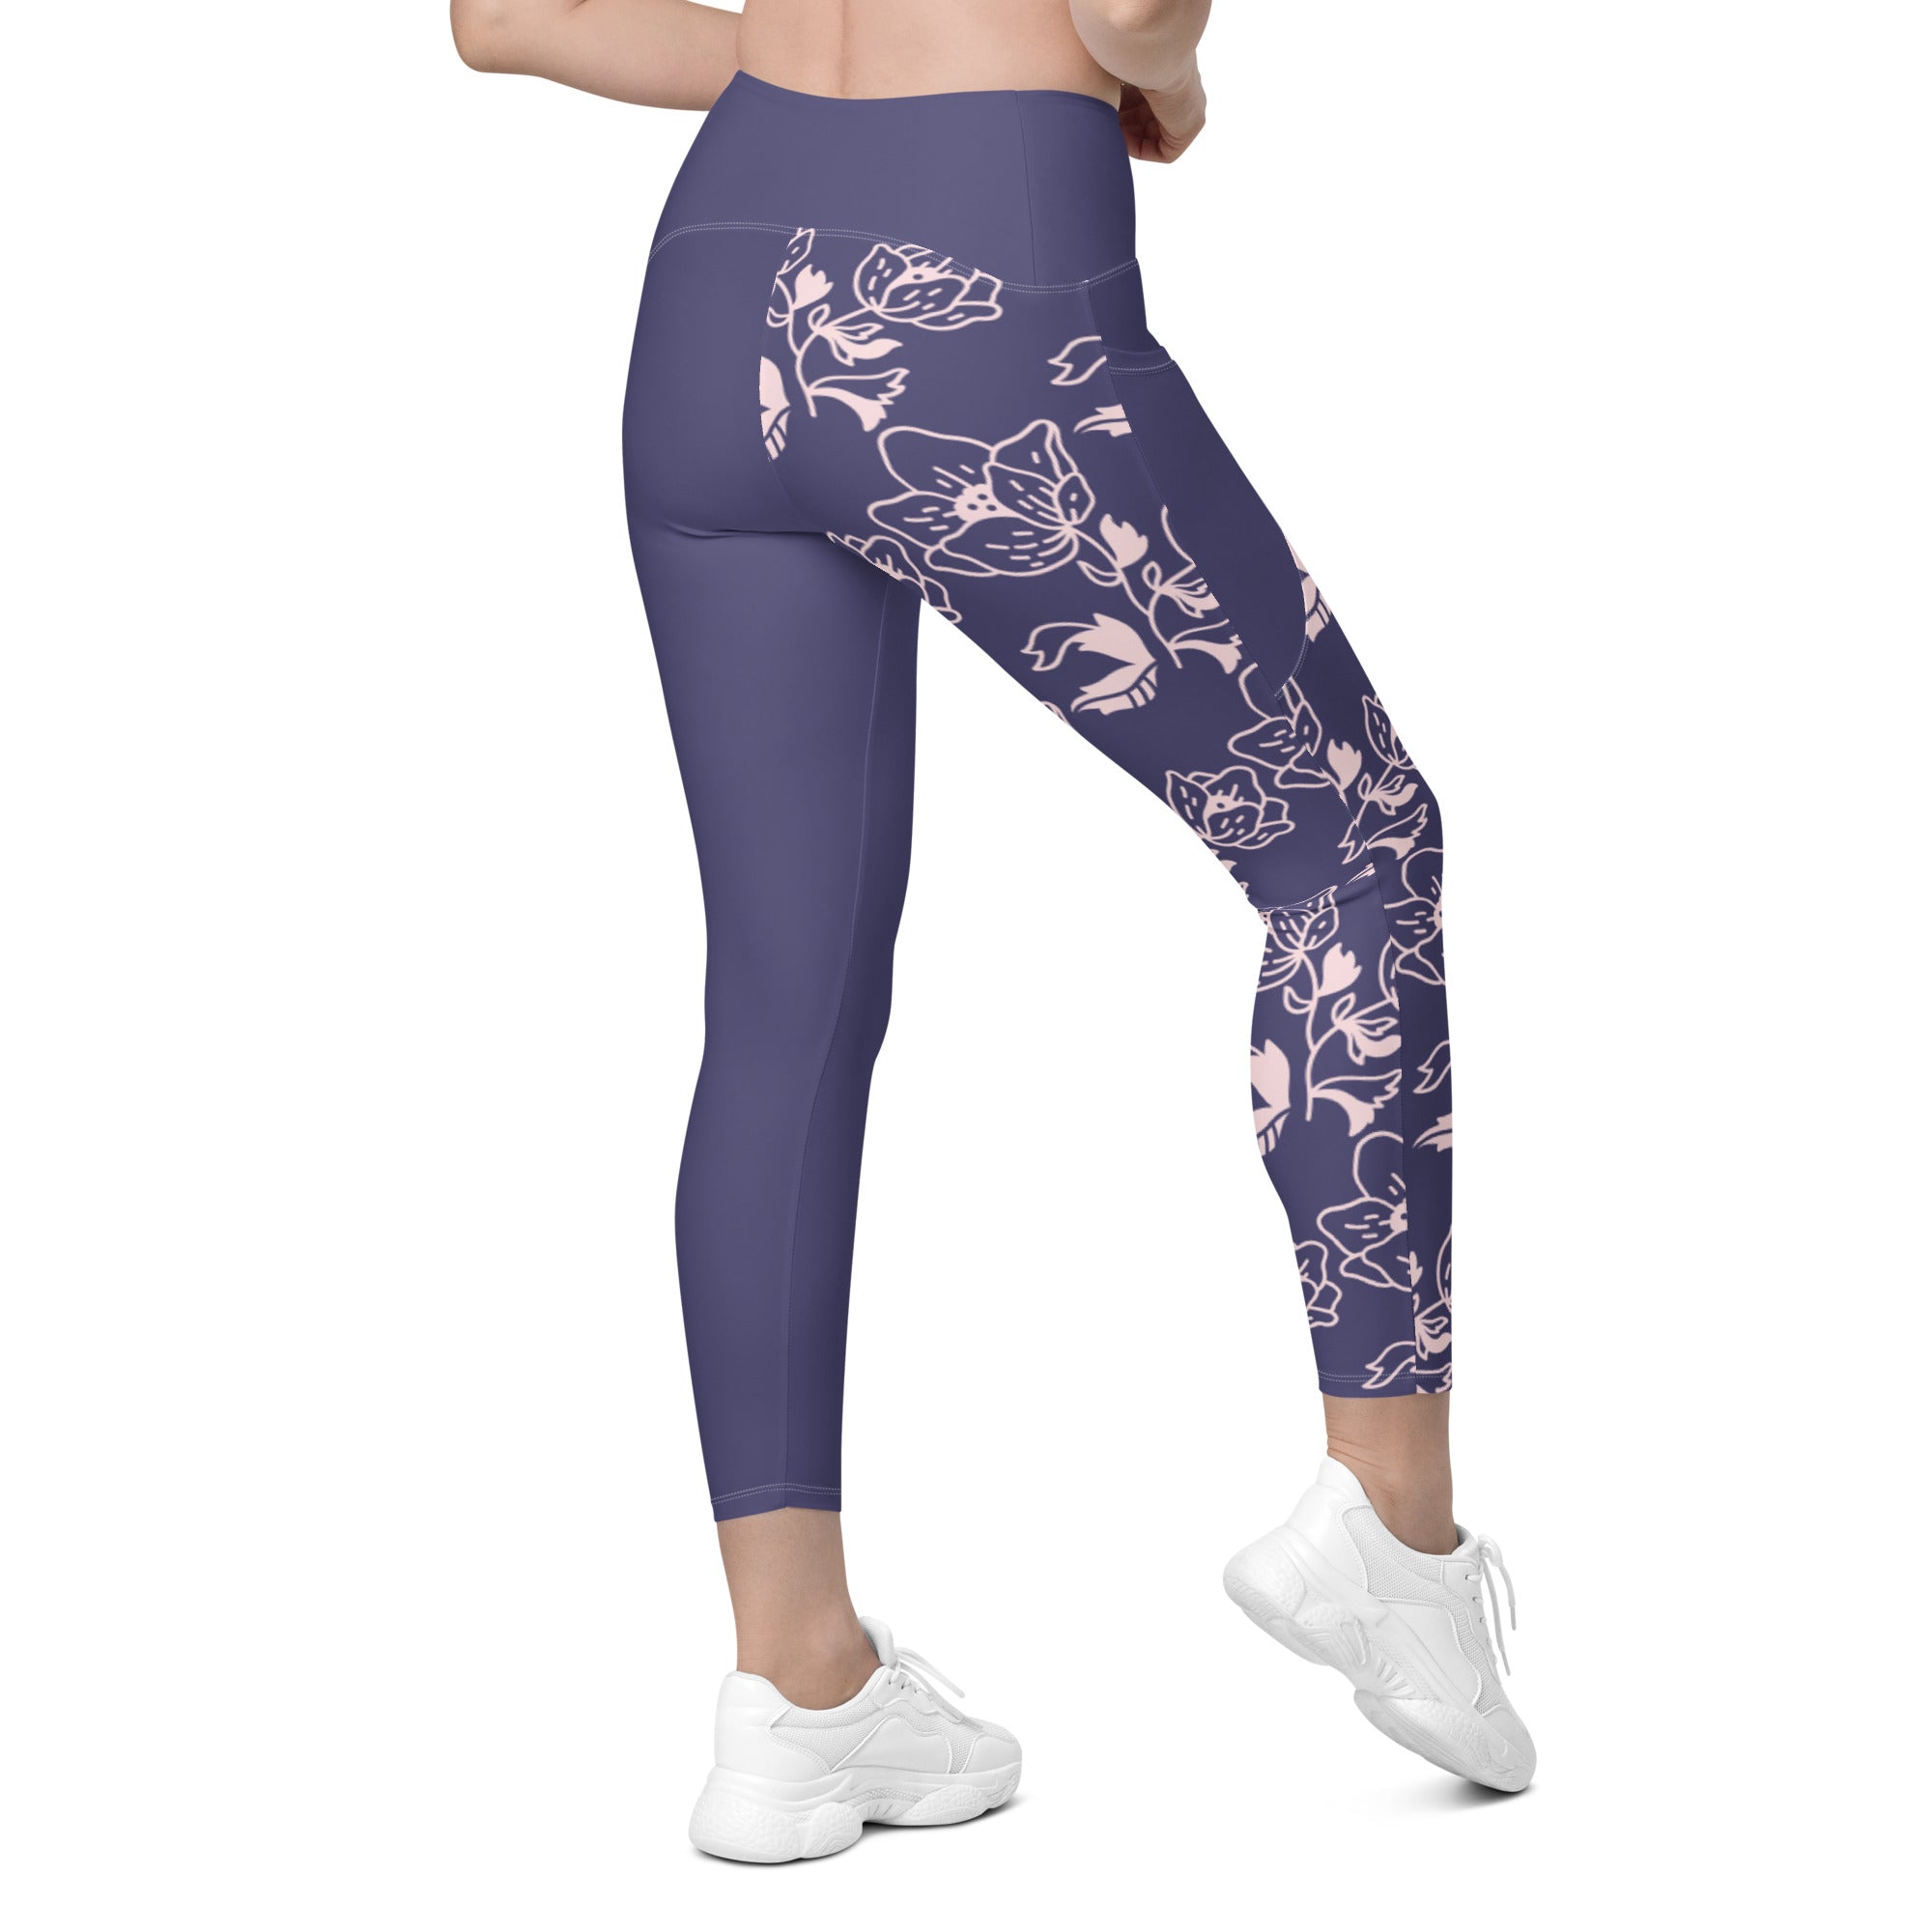 ⏰ Ends soon! 40% off all Crossover & Double Crossover leggings